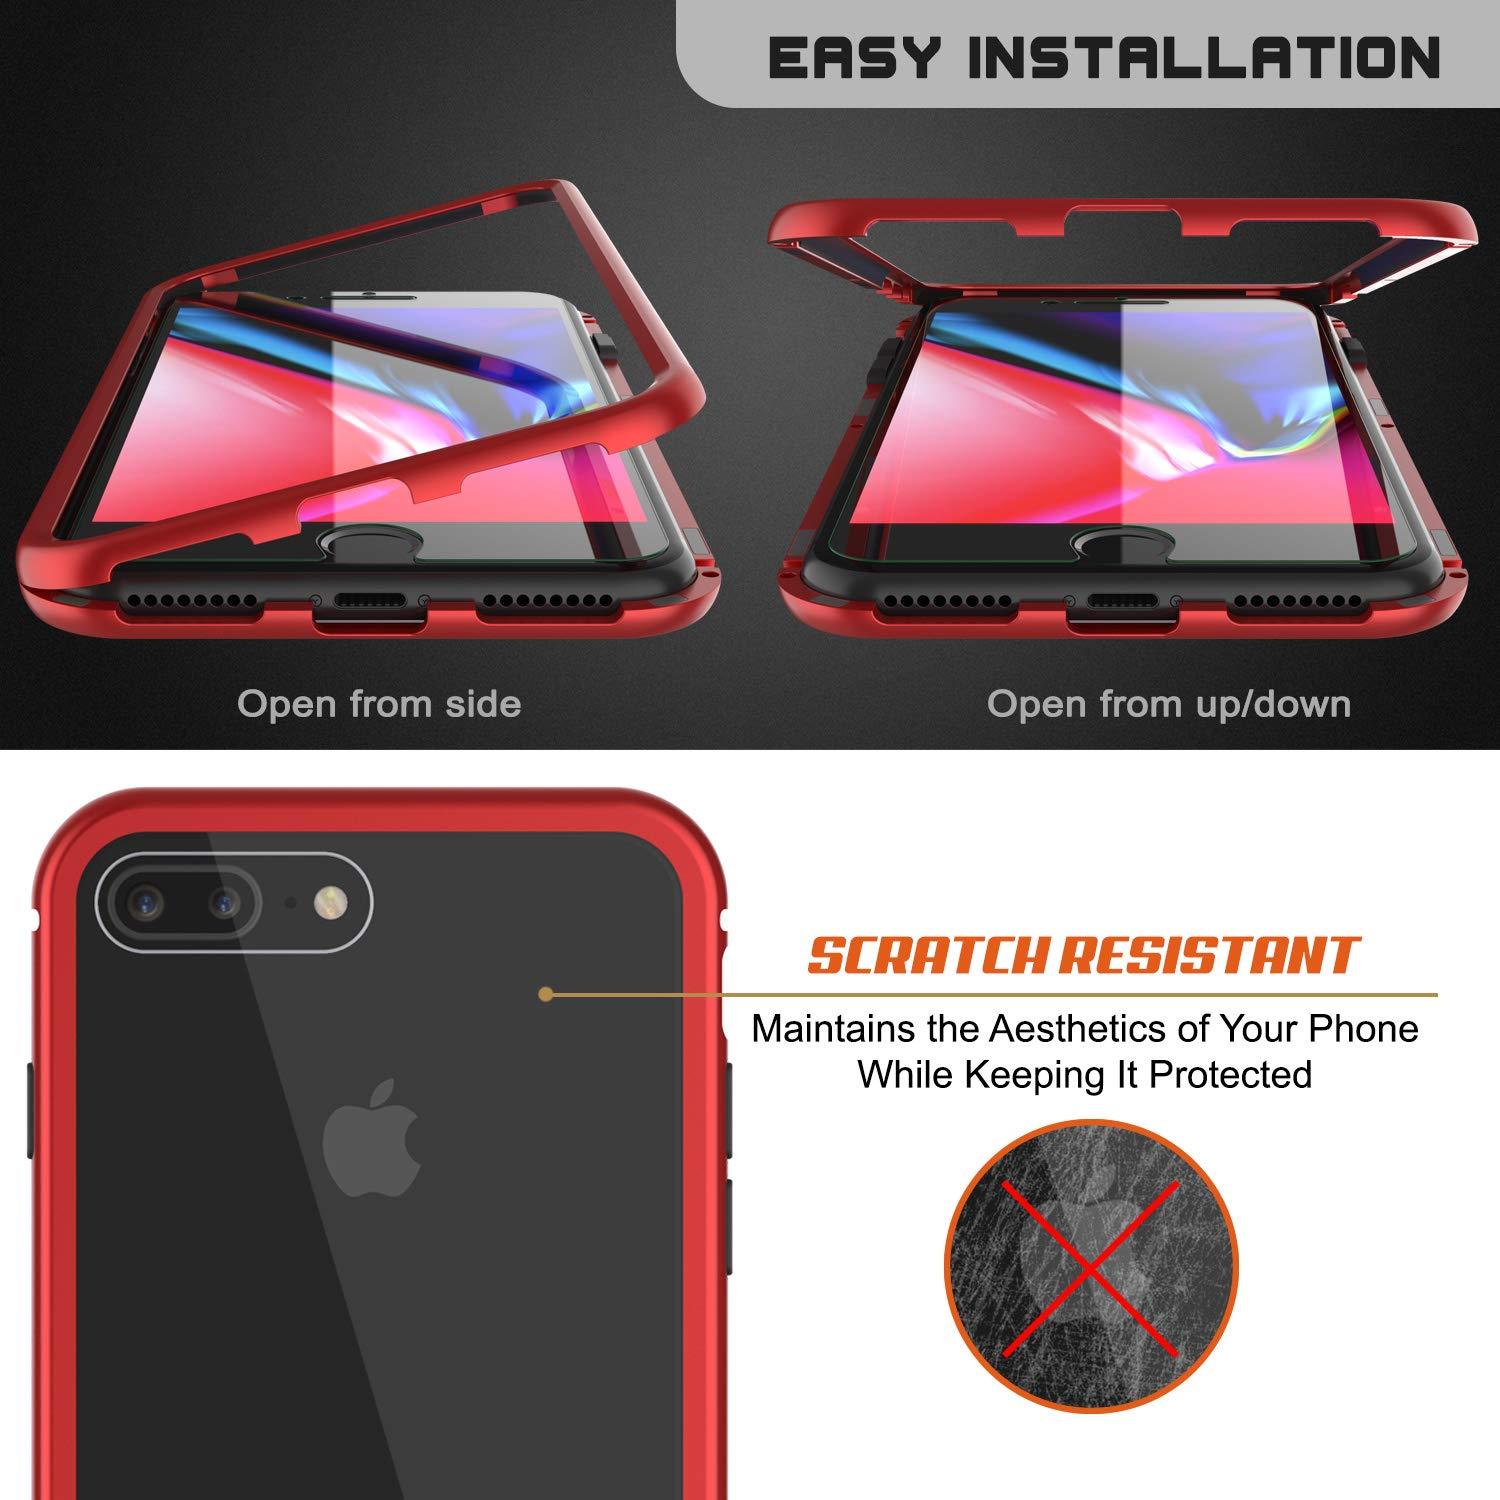 iPhone 8+ Plus Case, Punkcase Magnetix 2.0 Protective TPU Cover W/ Tempered Glass Screen Protector [Red]